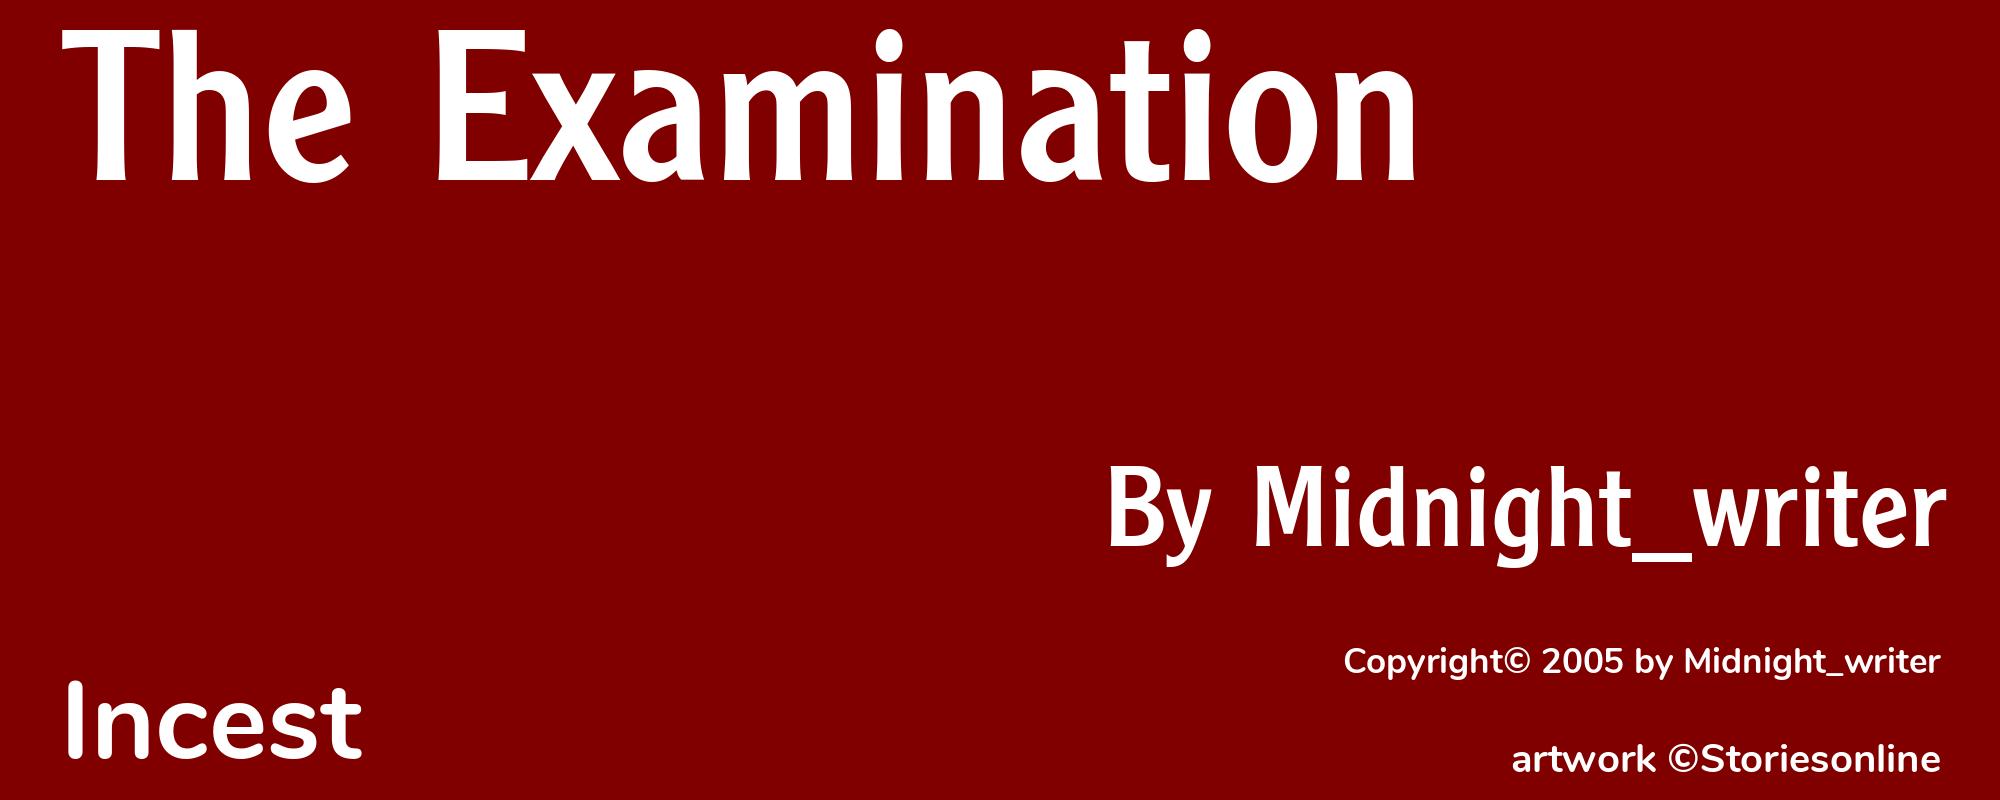 The Examination - Cover